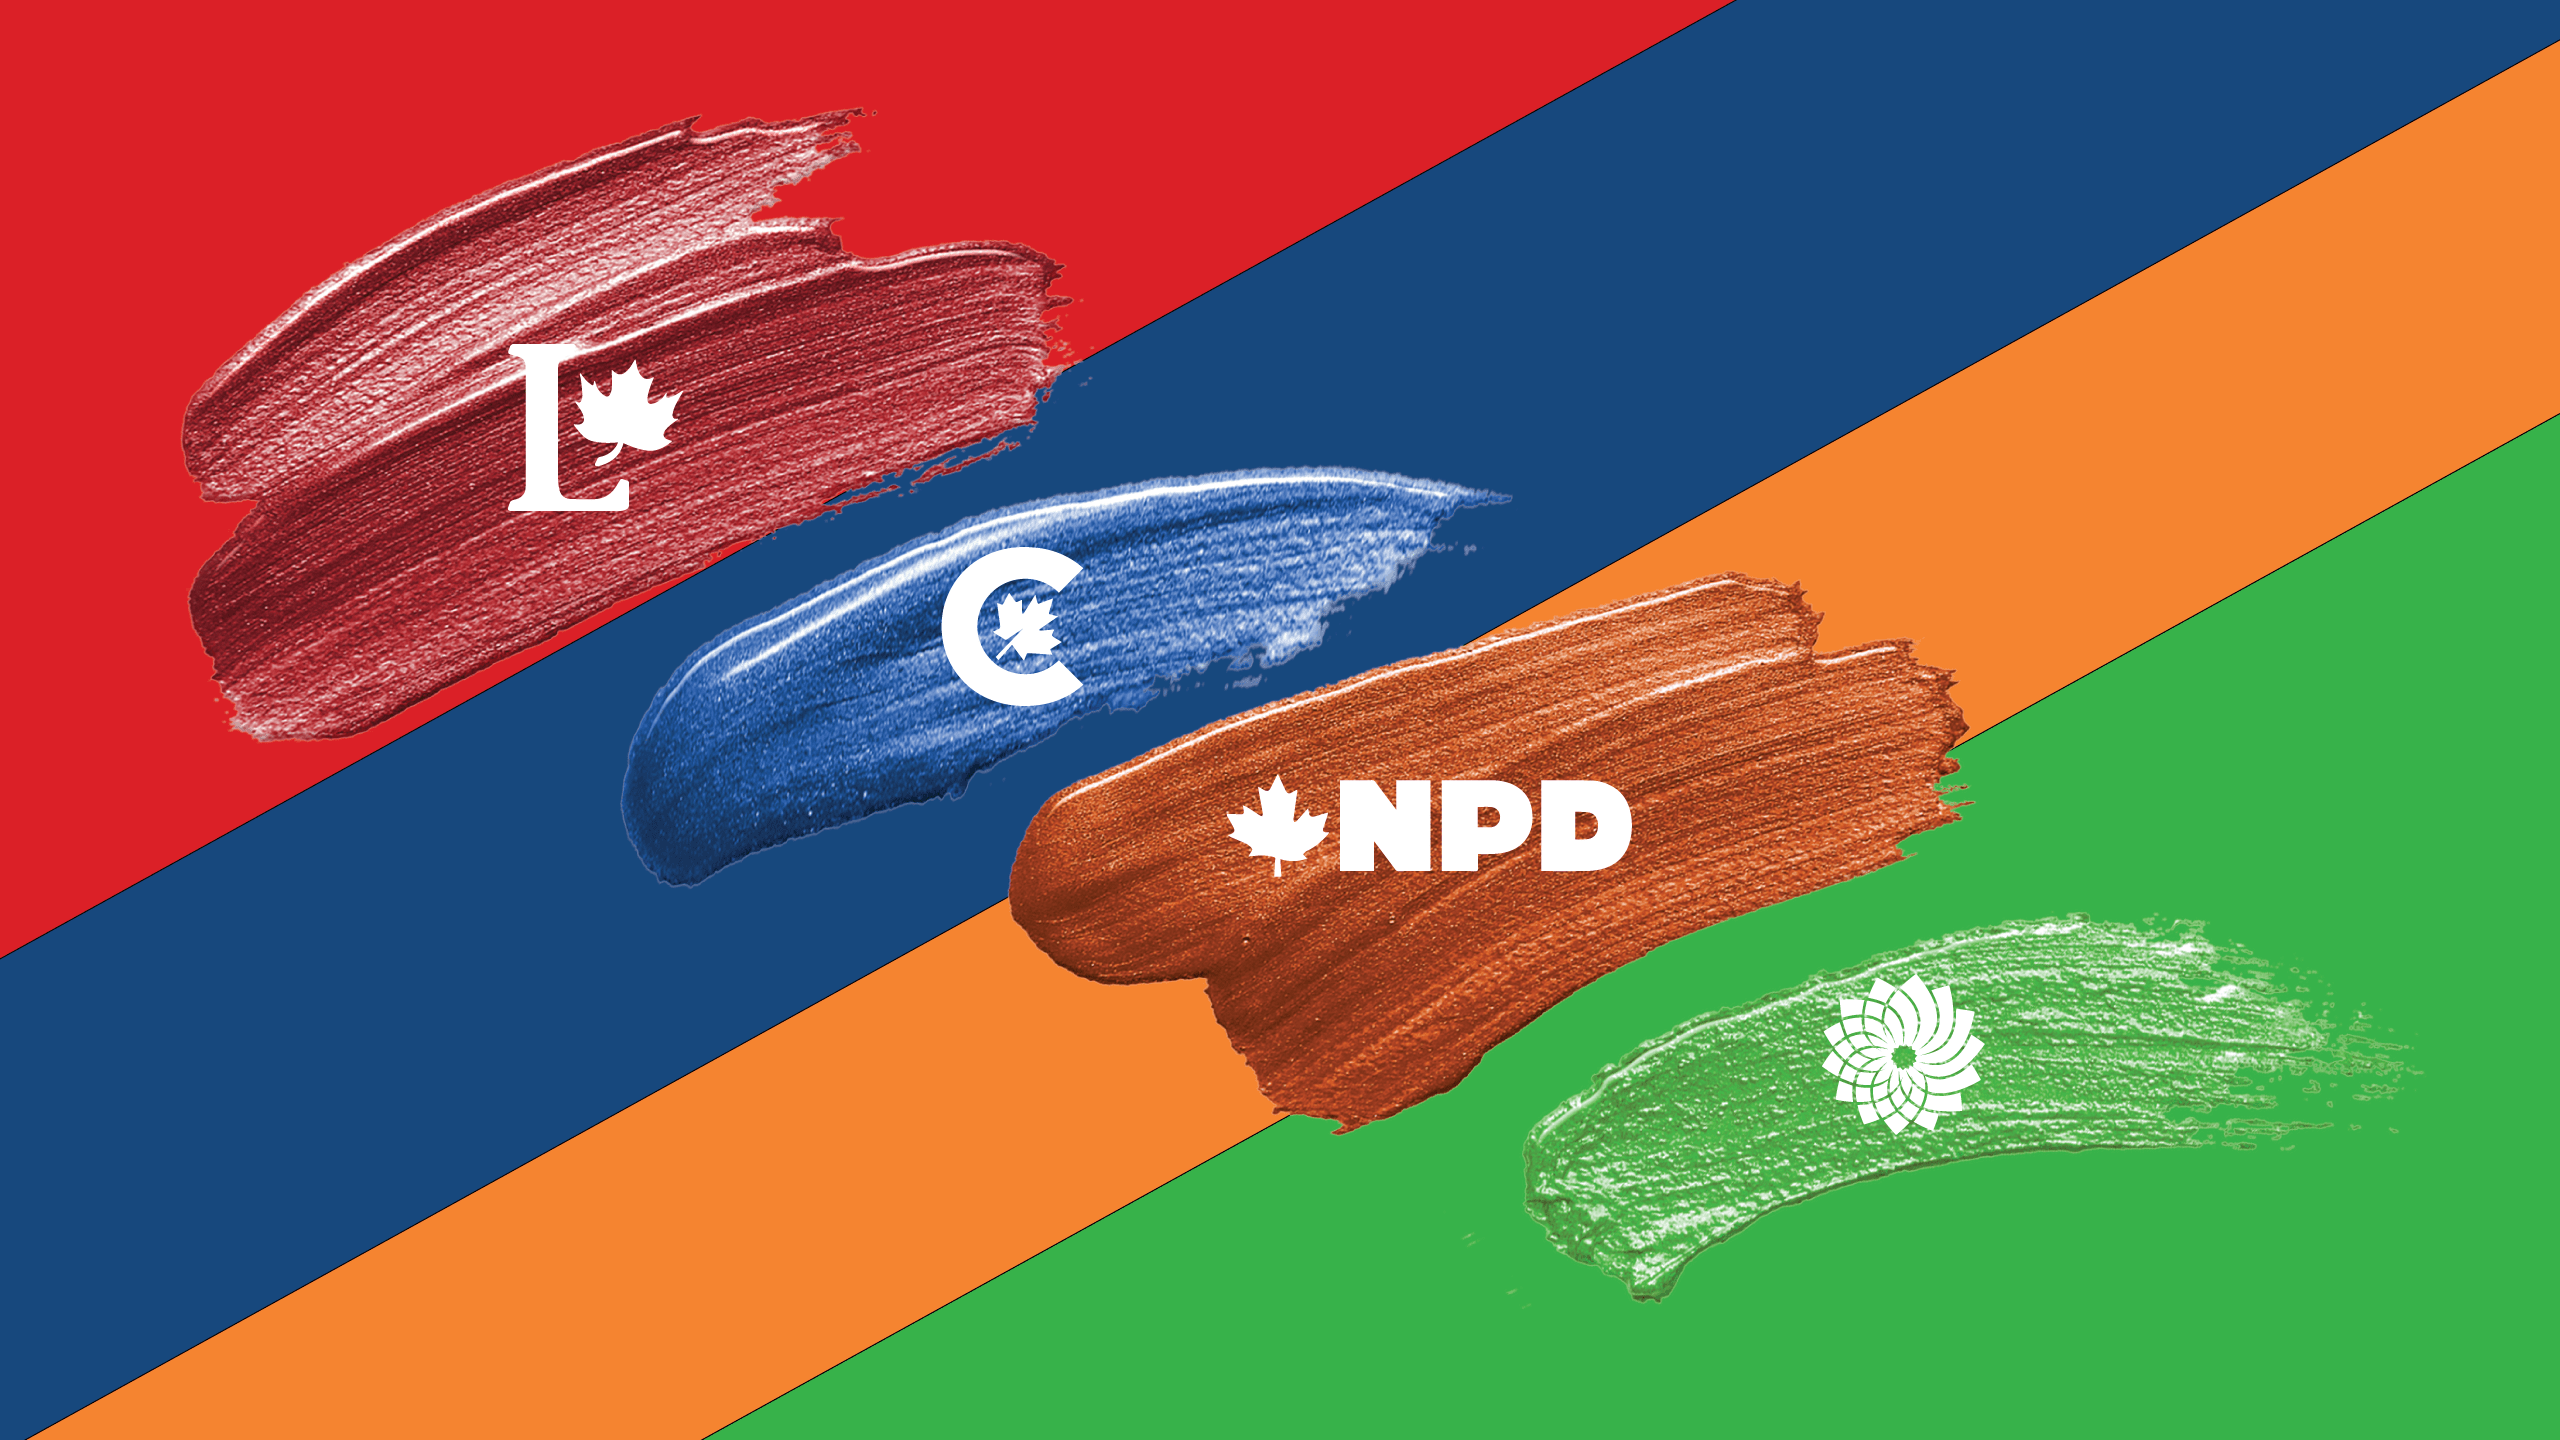 Paint swatches of red, blue, orange and green, each with their corresponding party logos on top: Liberal, Conservative Party of Canada, New Democratic Party and Green Party, respectively. Again, with the corresponding colours, the background consists of diagonal swatches of the party colours.